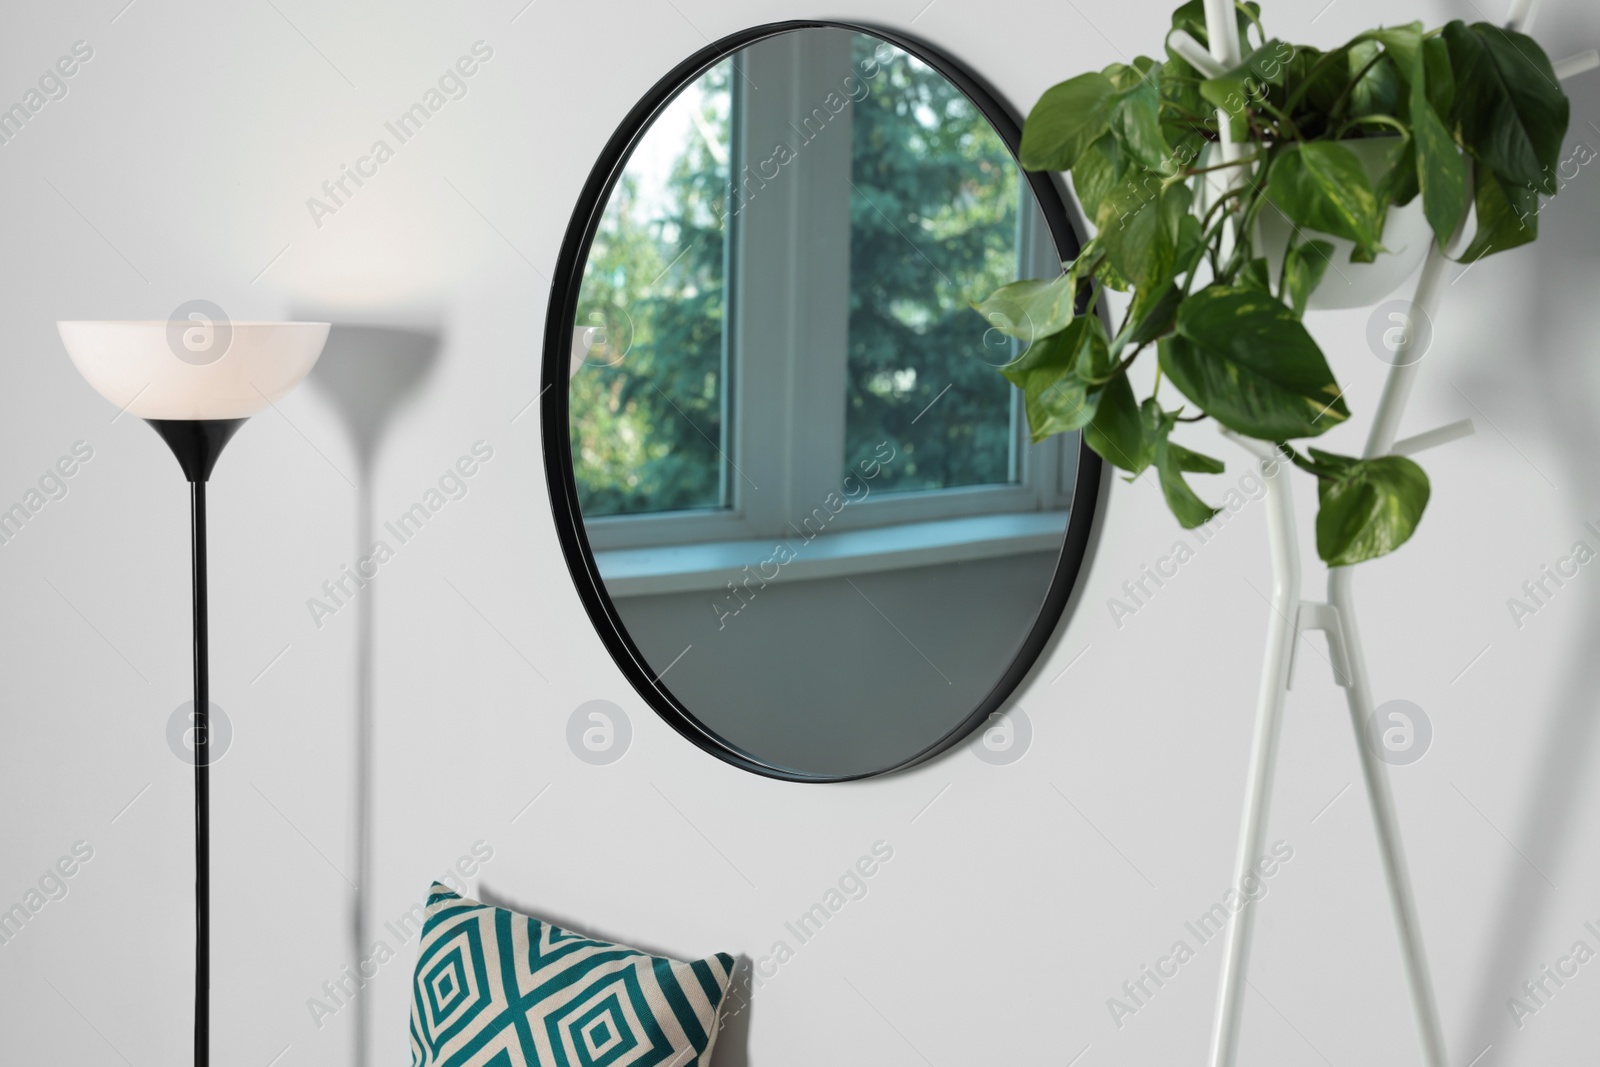 Photo of Stylish round mirror on white wall in room